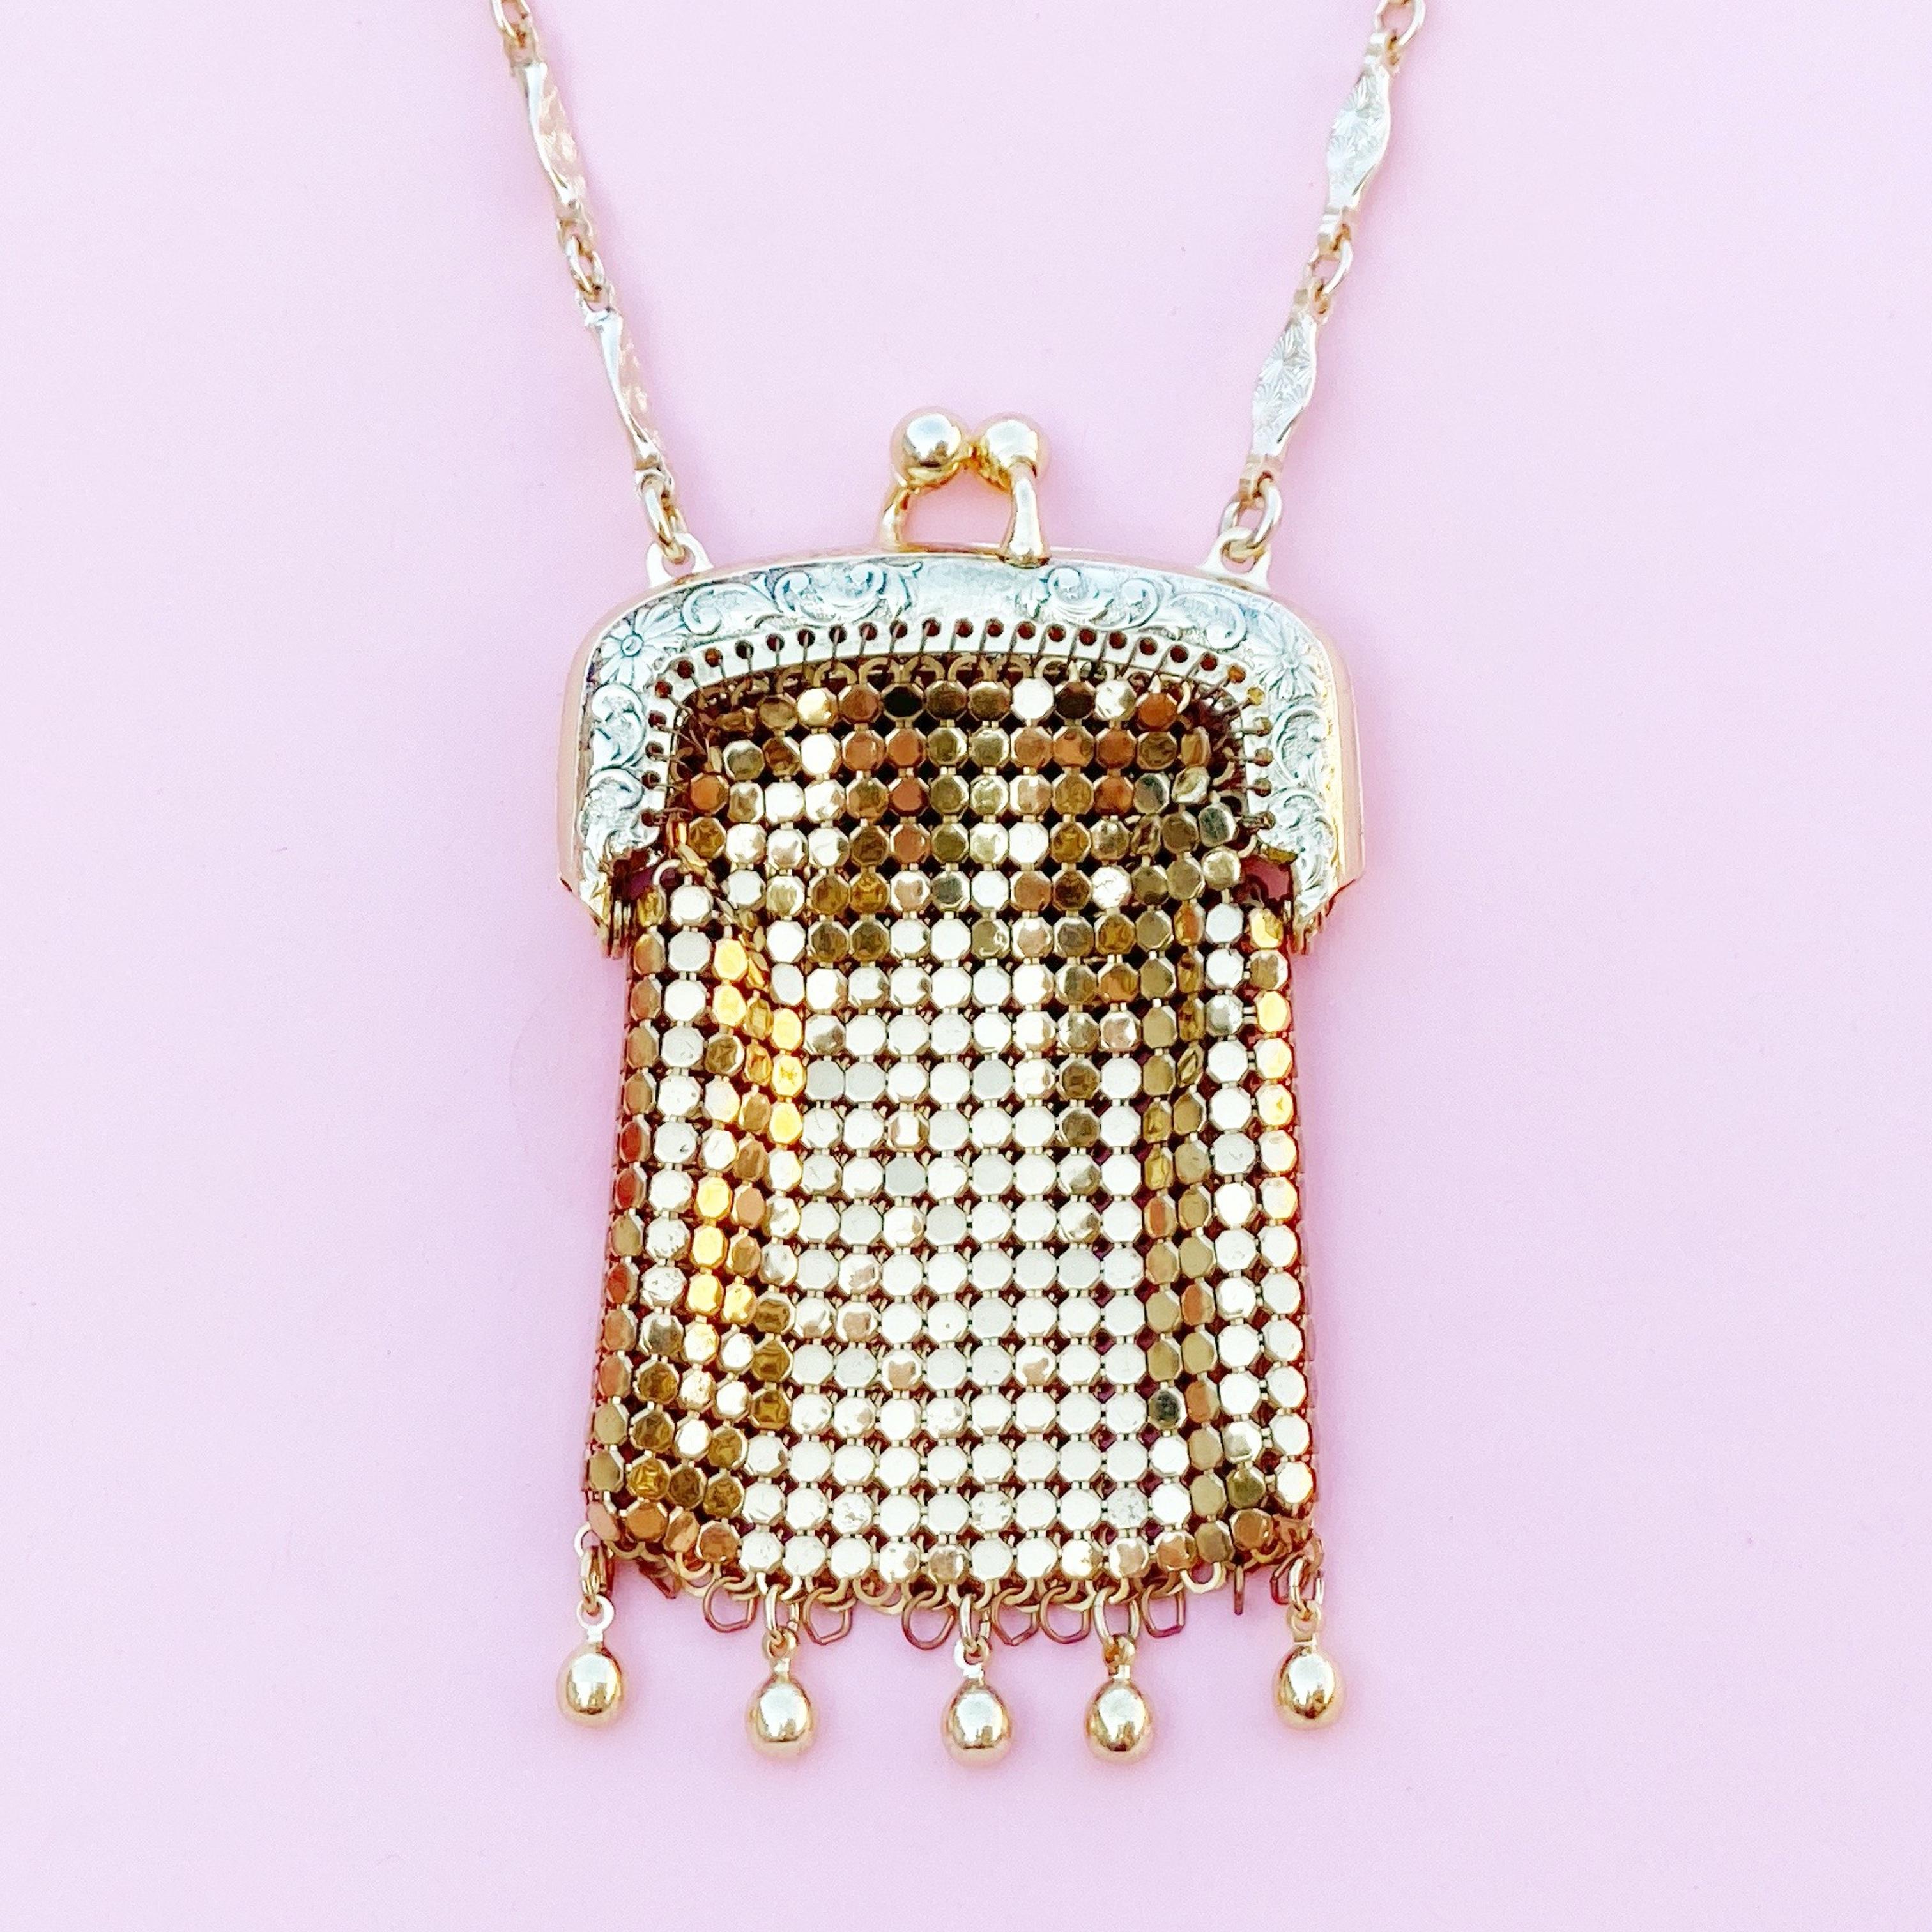 Modern Vintage Gold Mesh Pouch Necklace by Whiting & Davis, 1960s